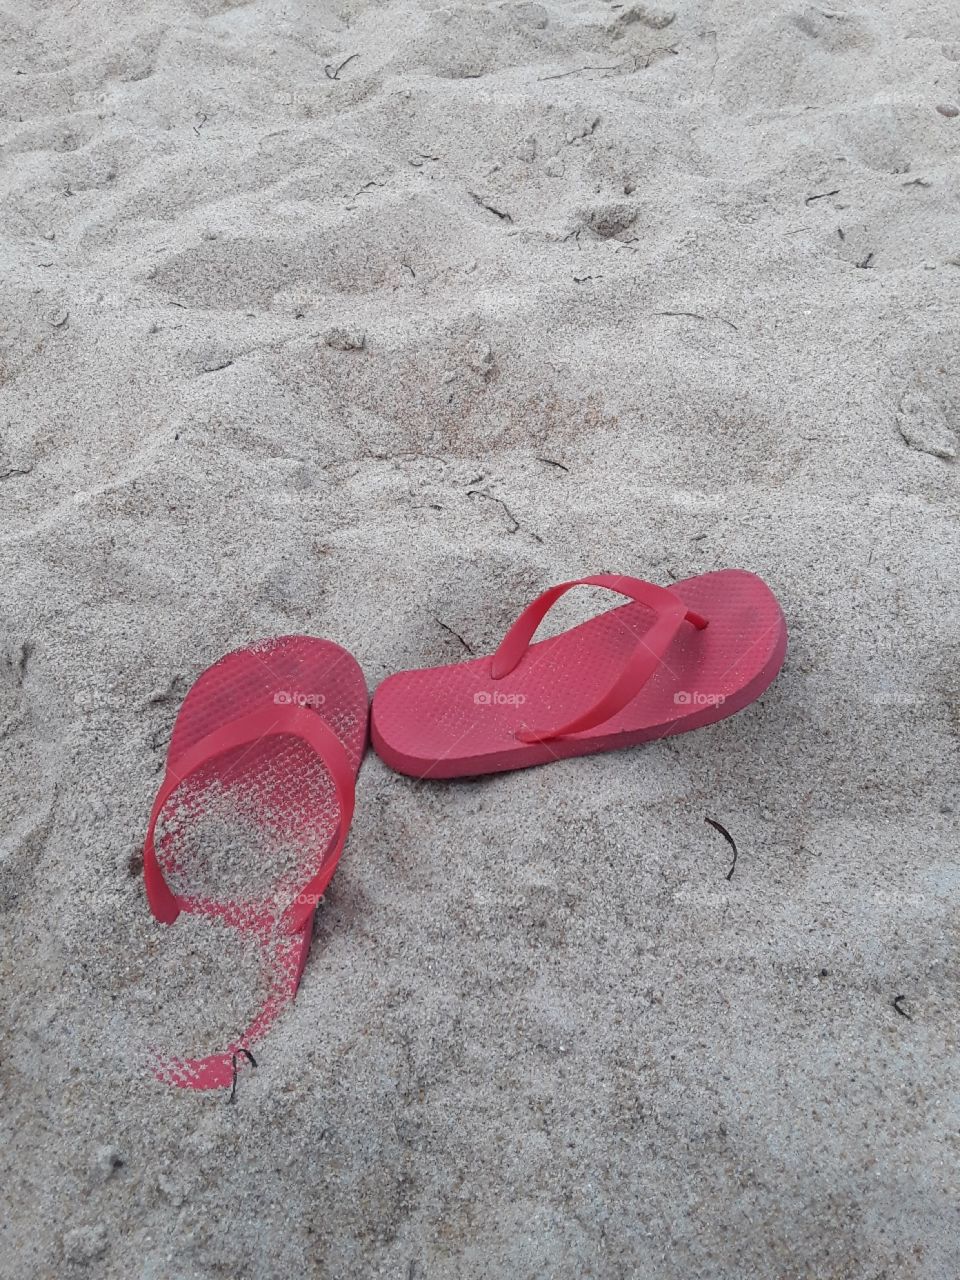 Red flip-flops partly buried in the sand. Taken at Virginia Beach, Virginia.